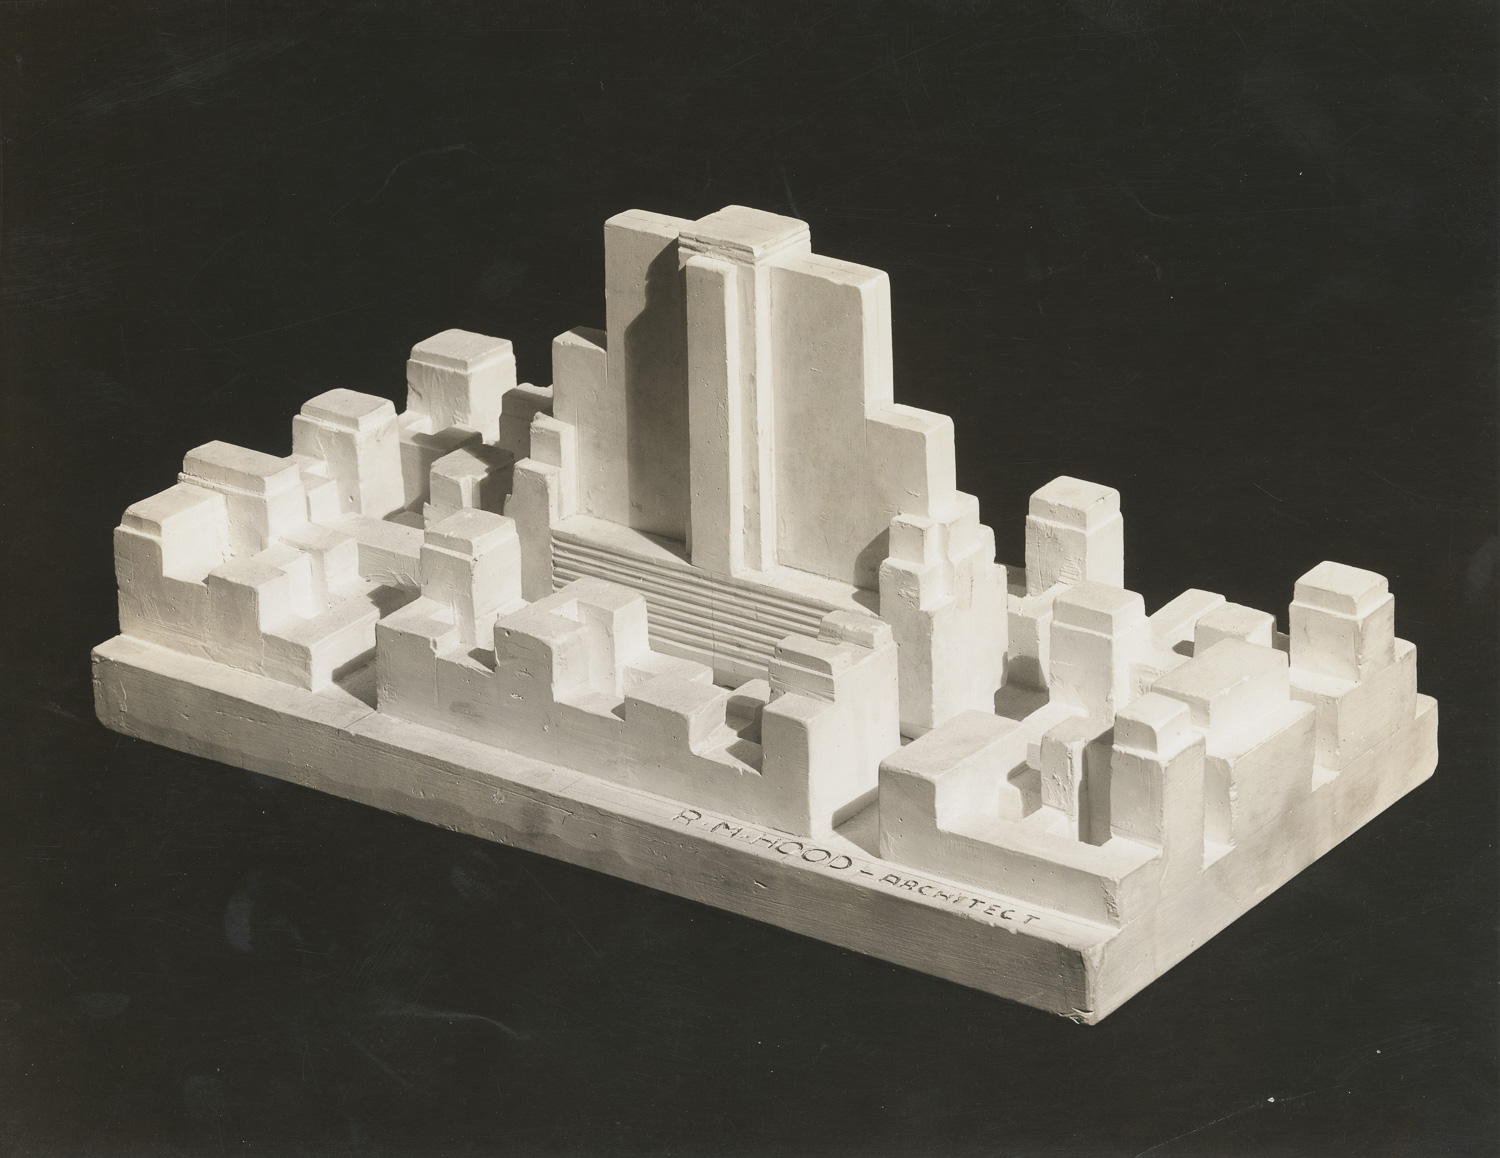 A black and white photograph taken from an angle above an architectural model on a rectangular base. At the center of a model is a building that fills an entire city block. A flattened slab with setbacks rises up from a base that fills the entire block. Surrounding this main central building are other city blocks with lower, nondescript buildings.